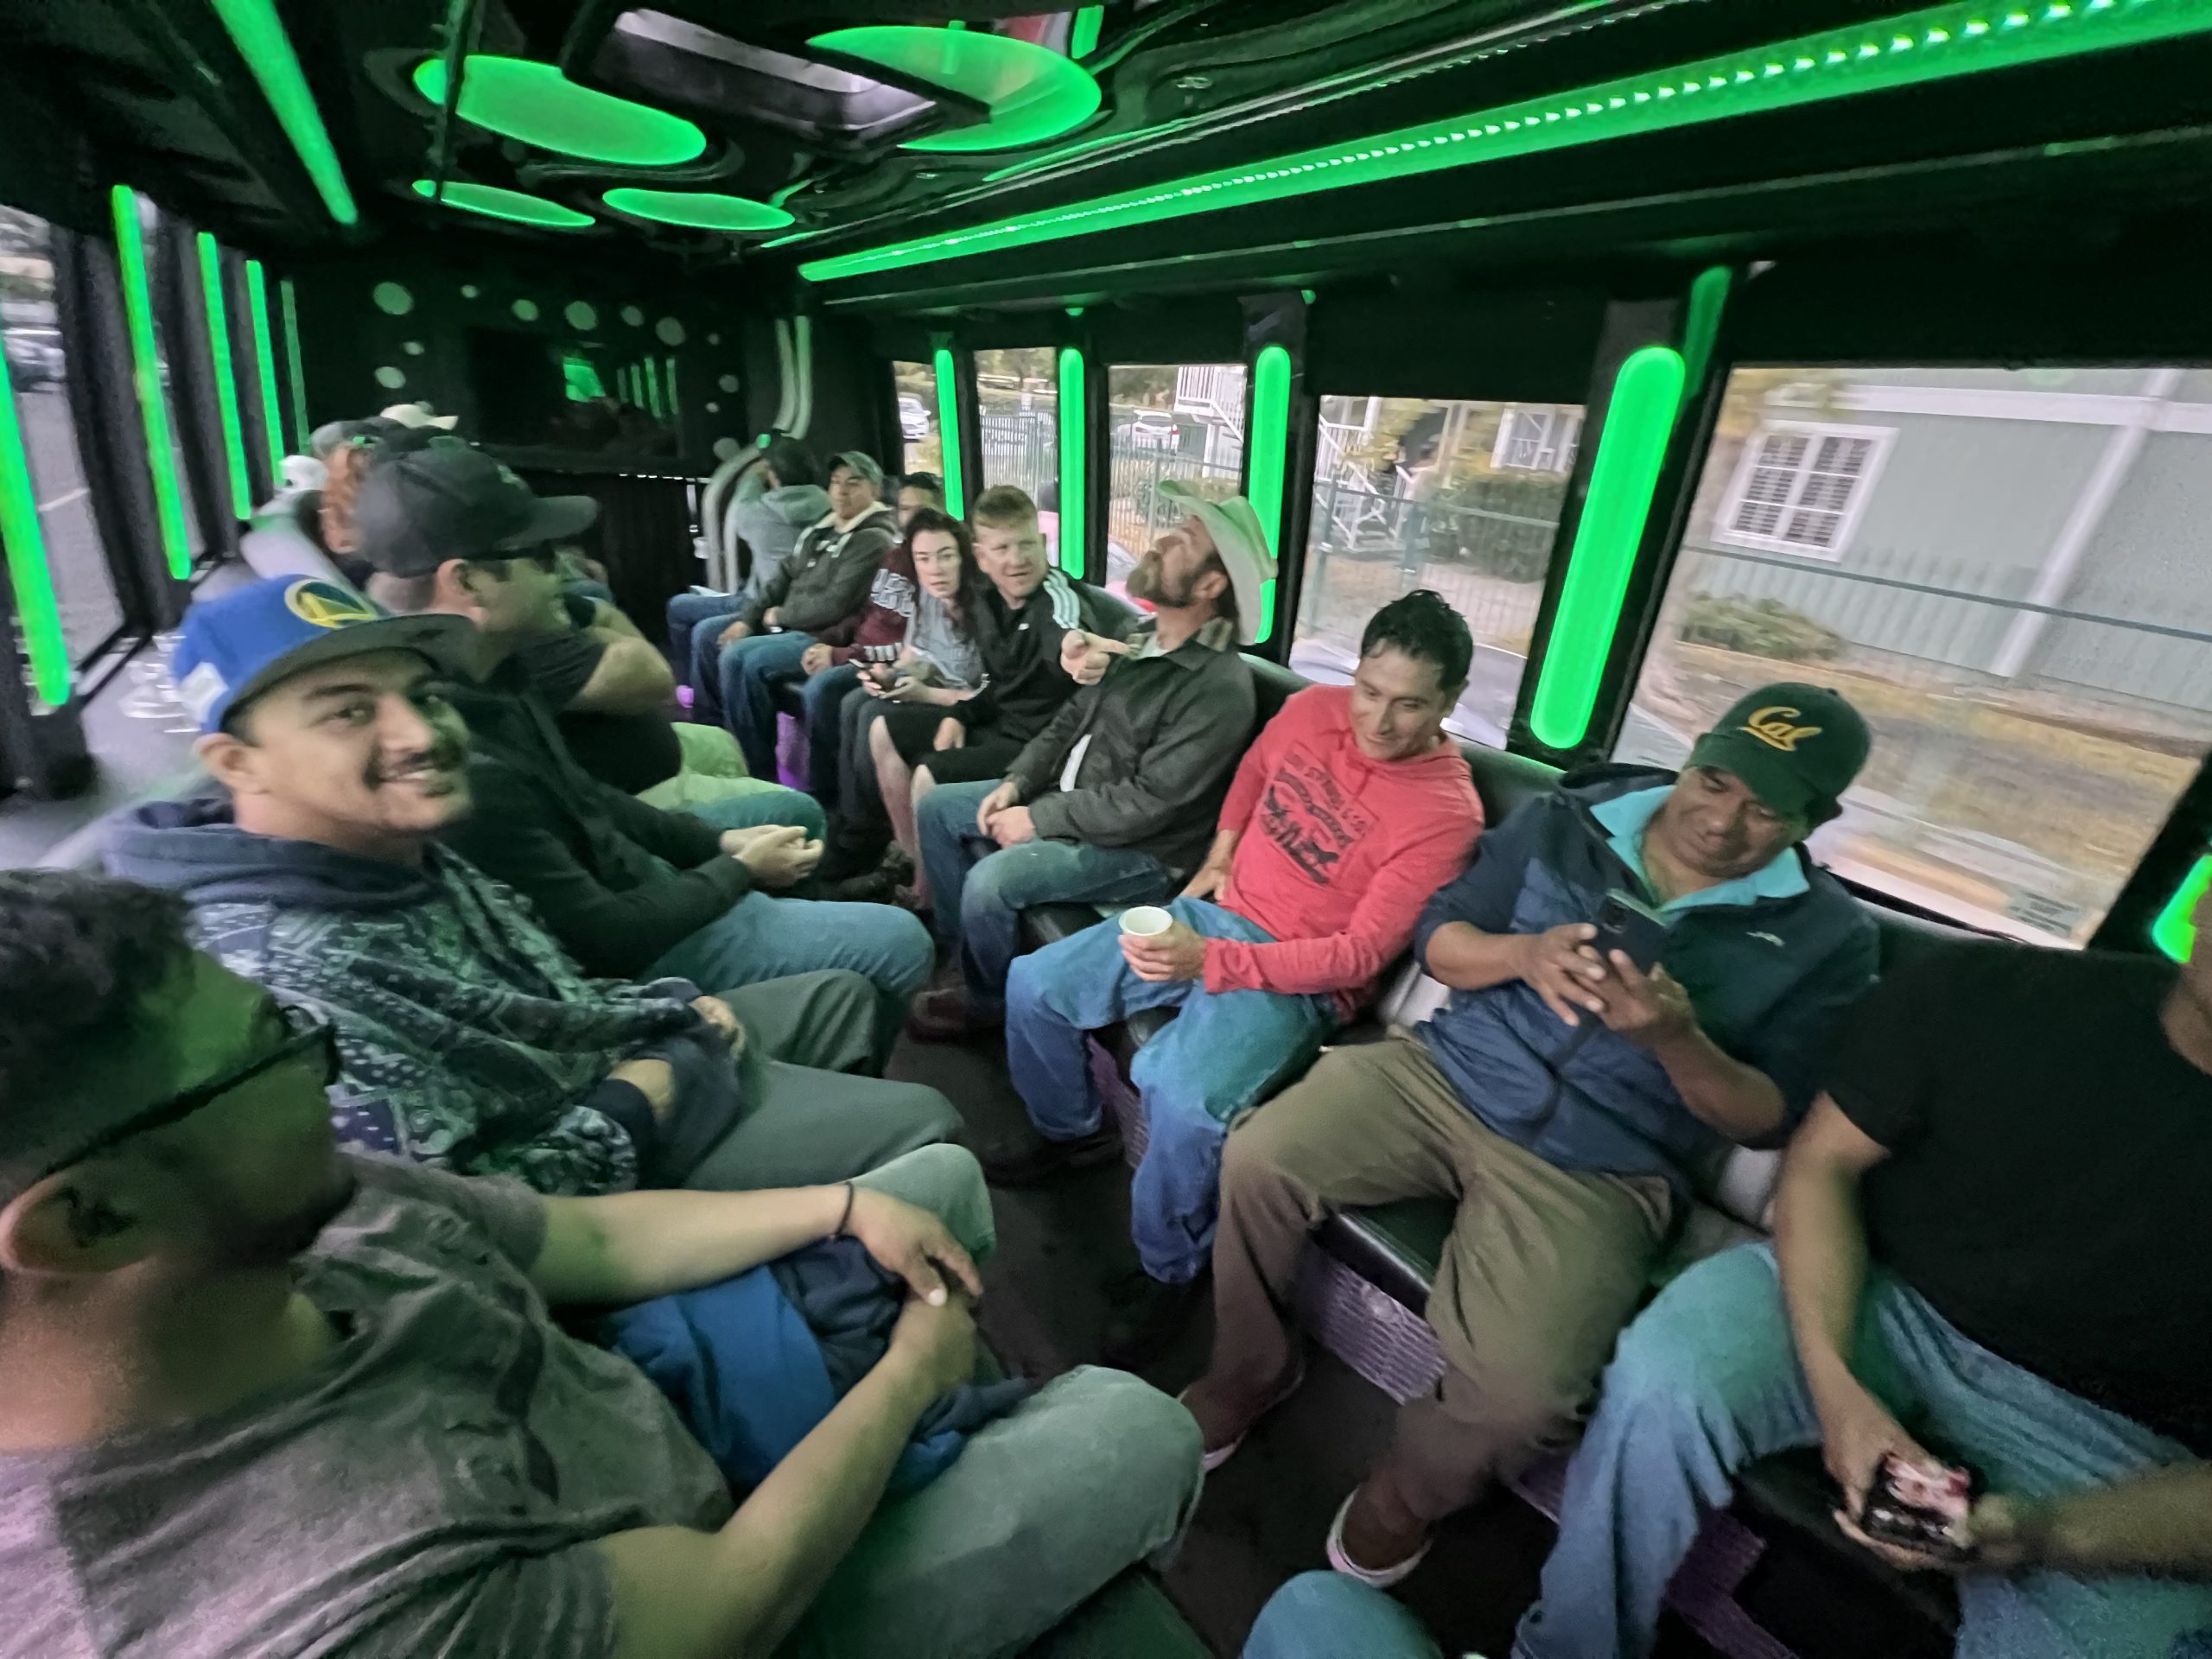 A group of people sitting on a bus with green lights.